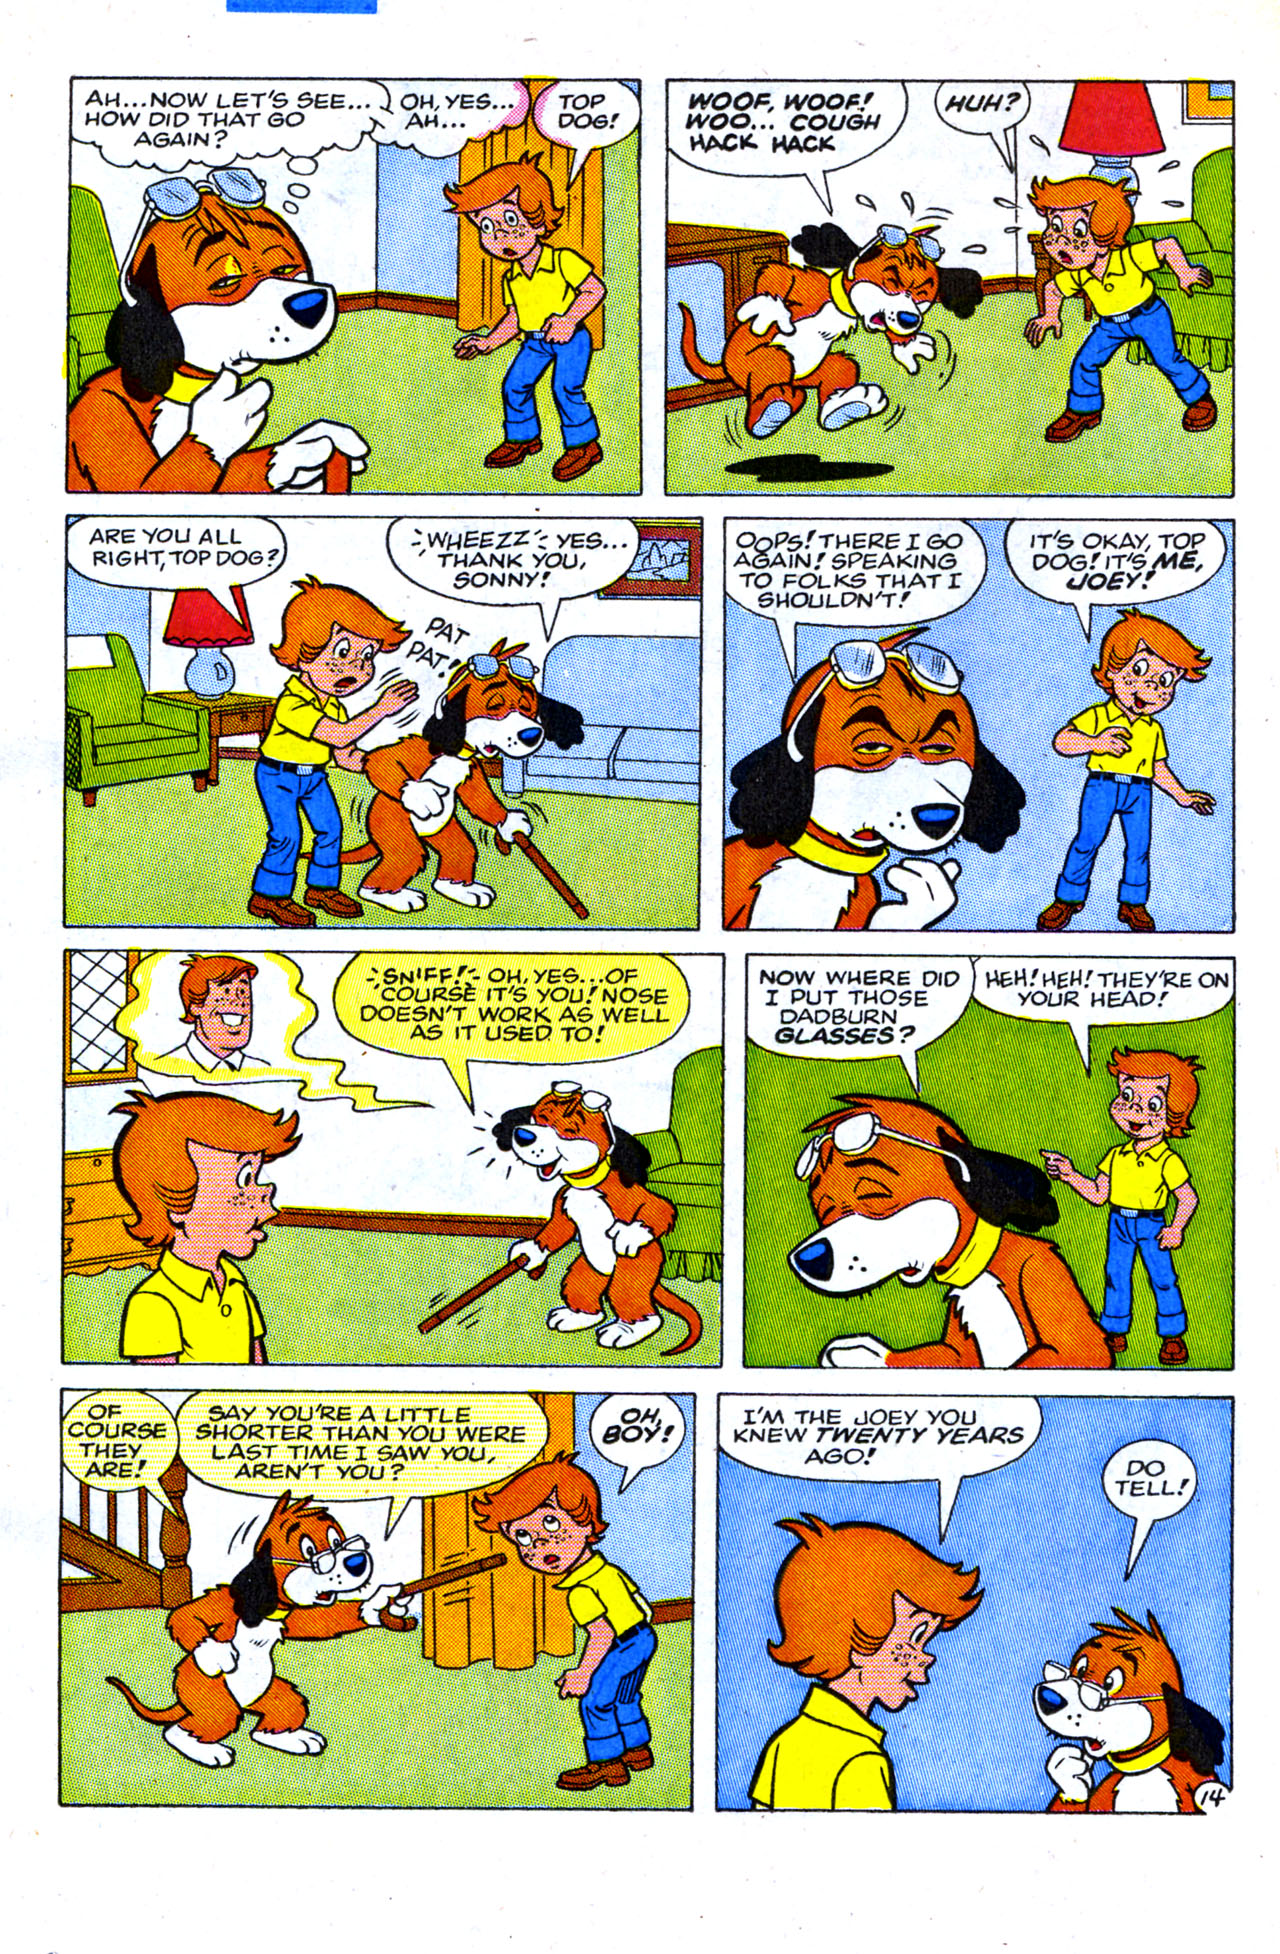 Read online Top Dog comic -  Issue #13 - 20